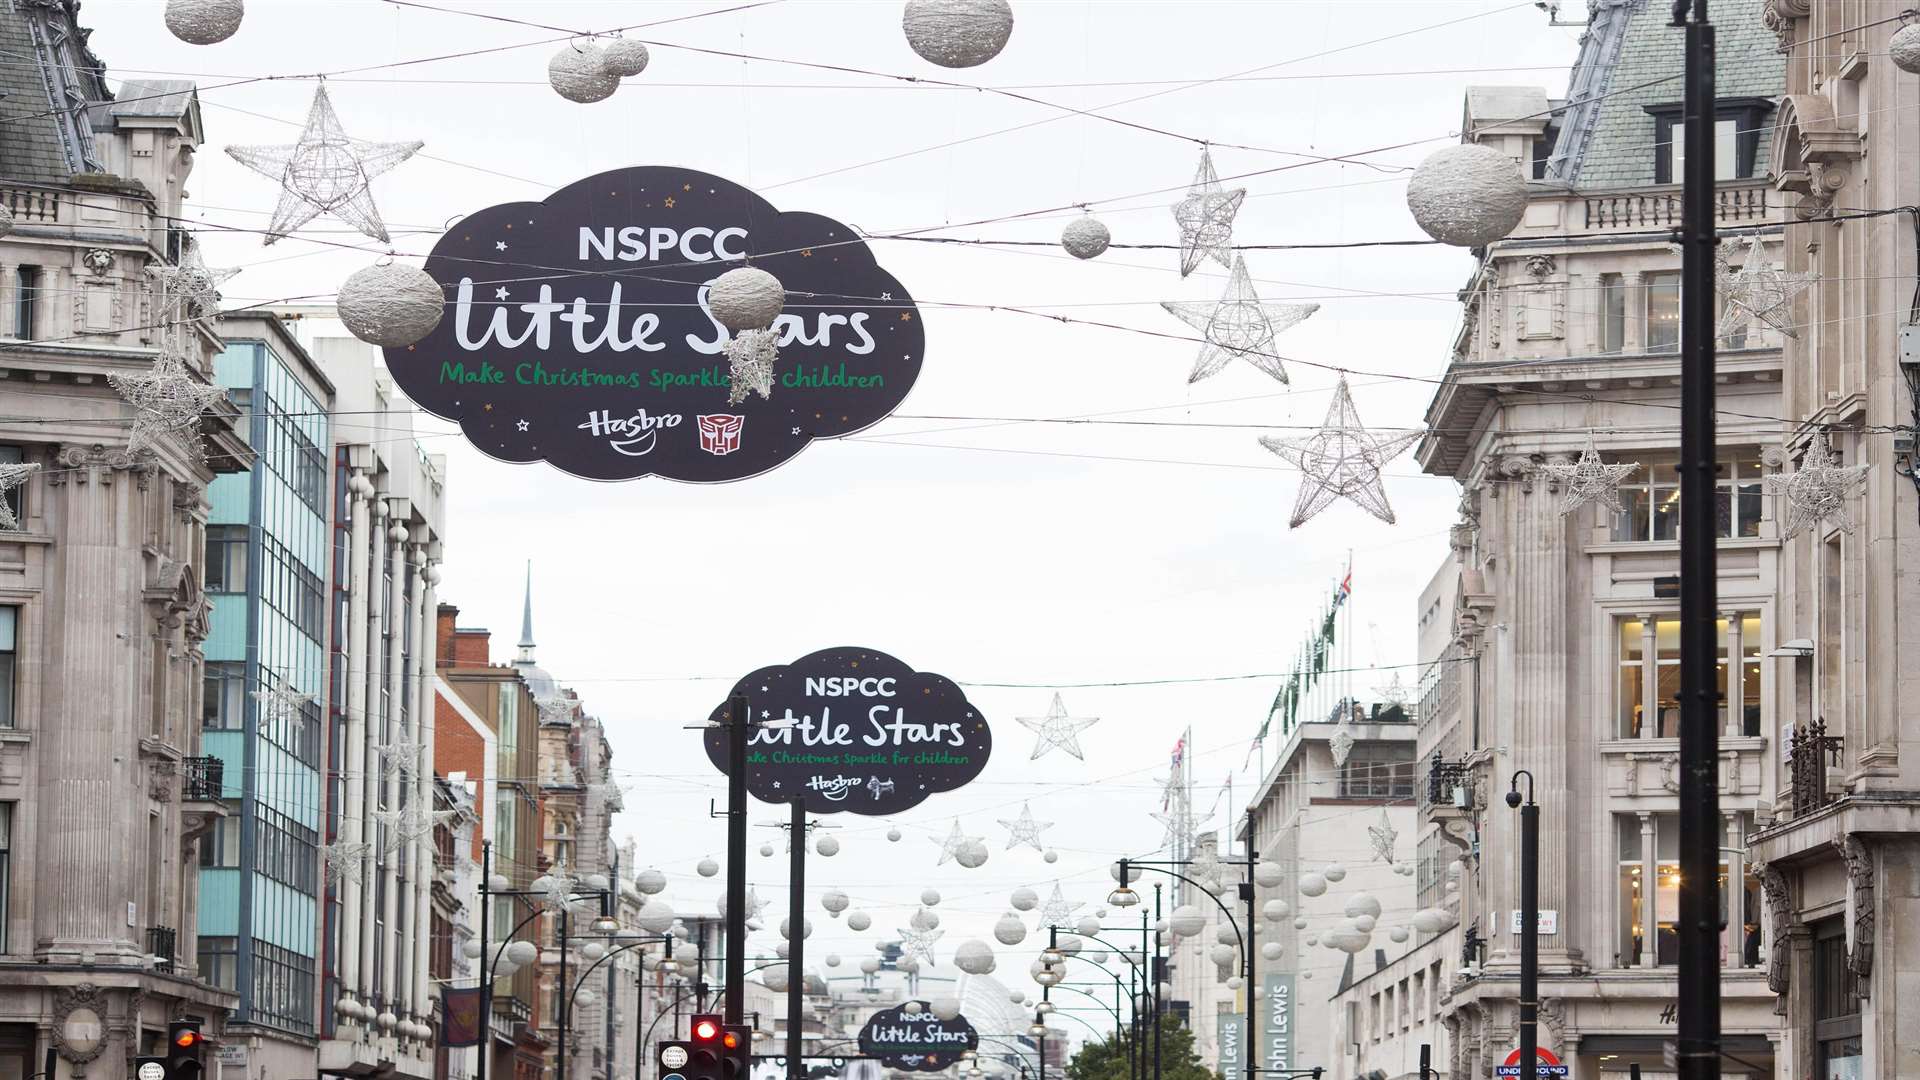 The Oxford Street Christmas lights, with the NSPCC Little Stars campaign